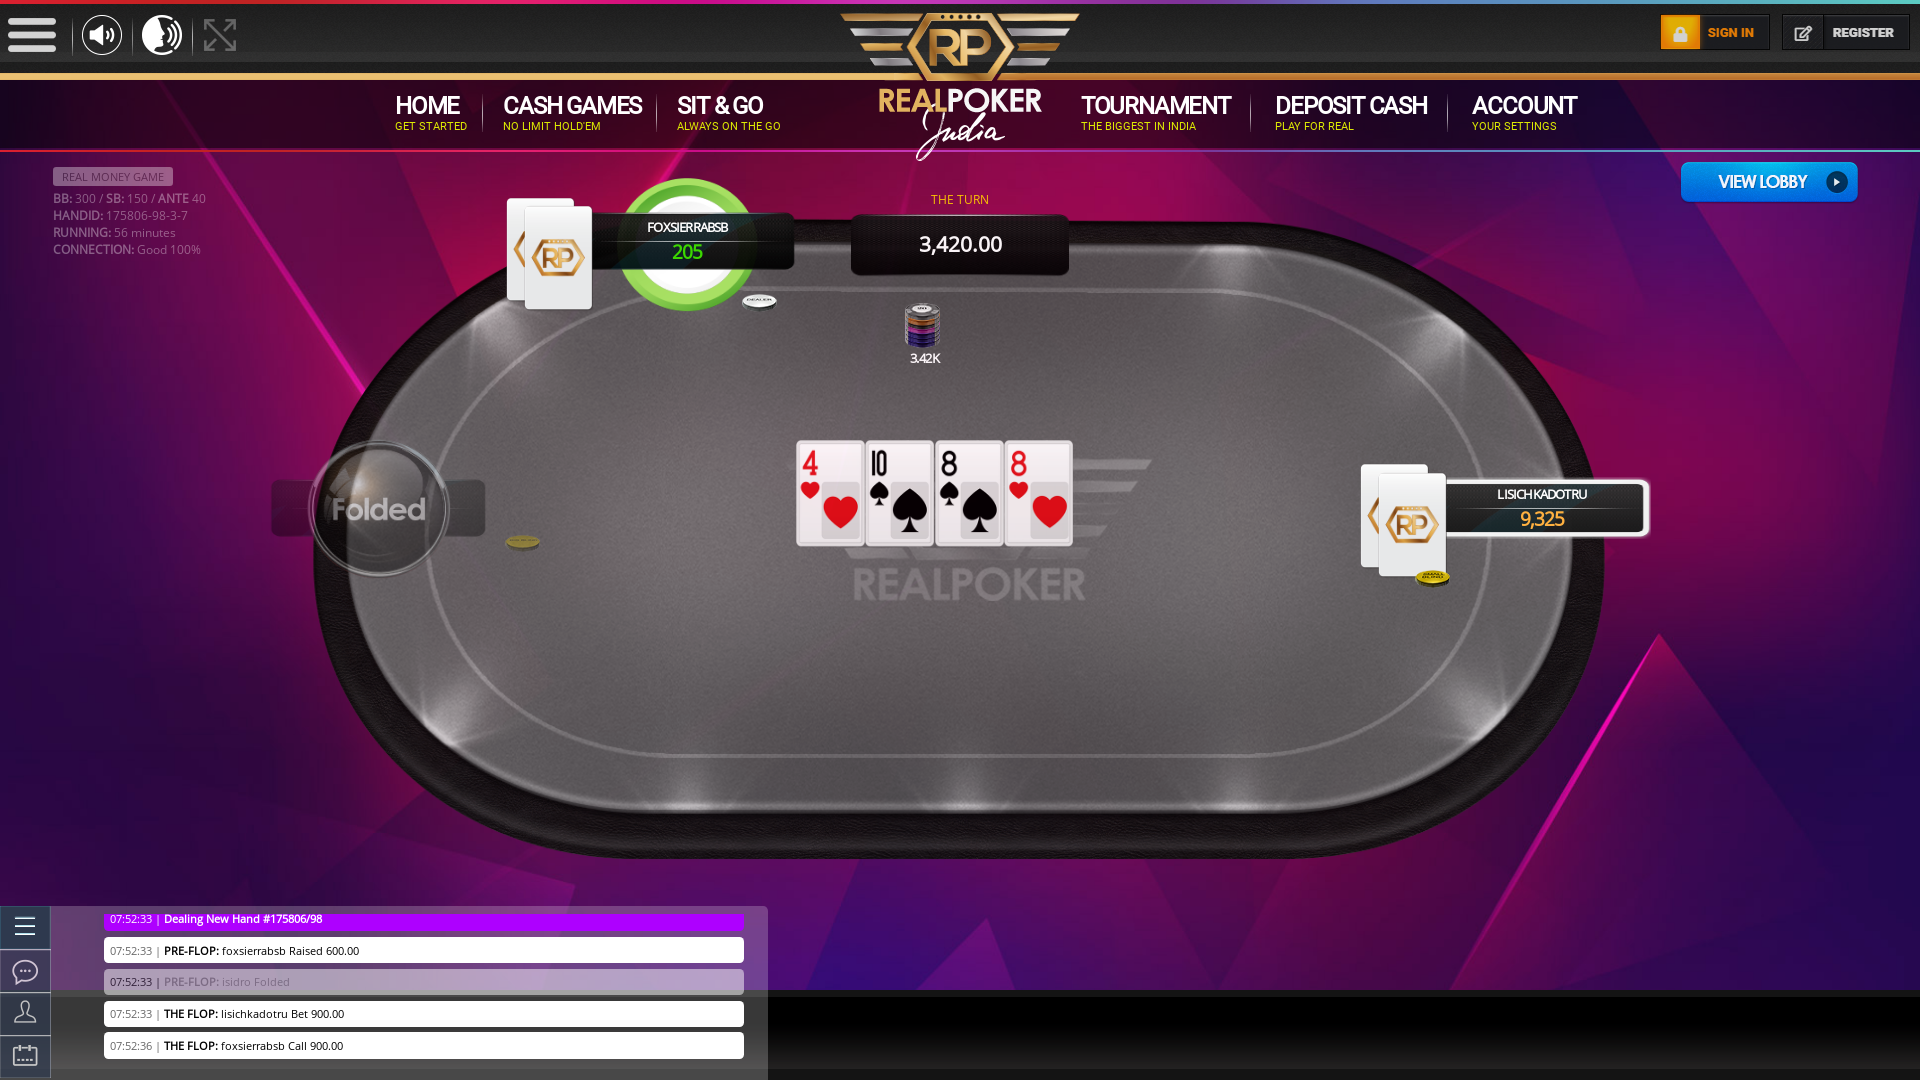 Real poker 10 player table in the 55th minute